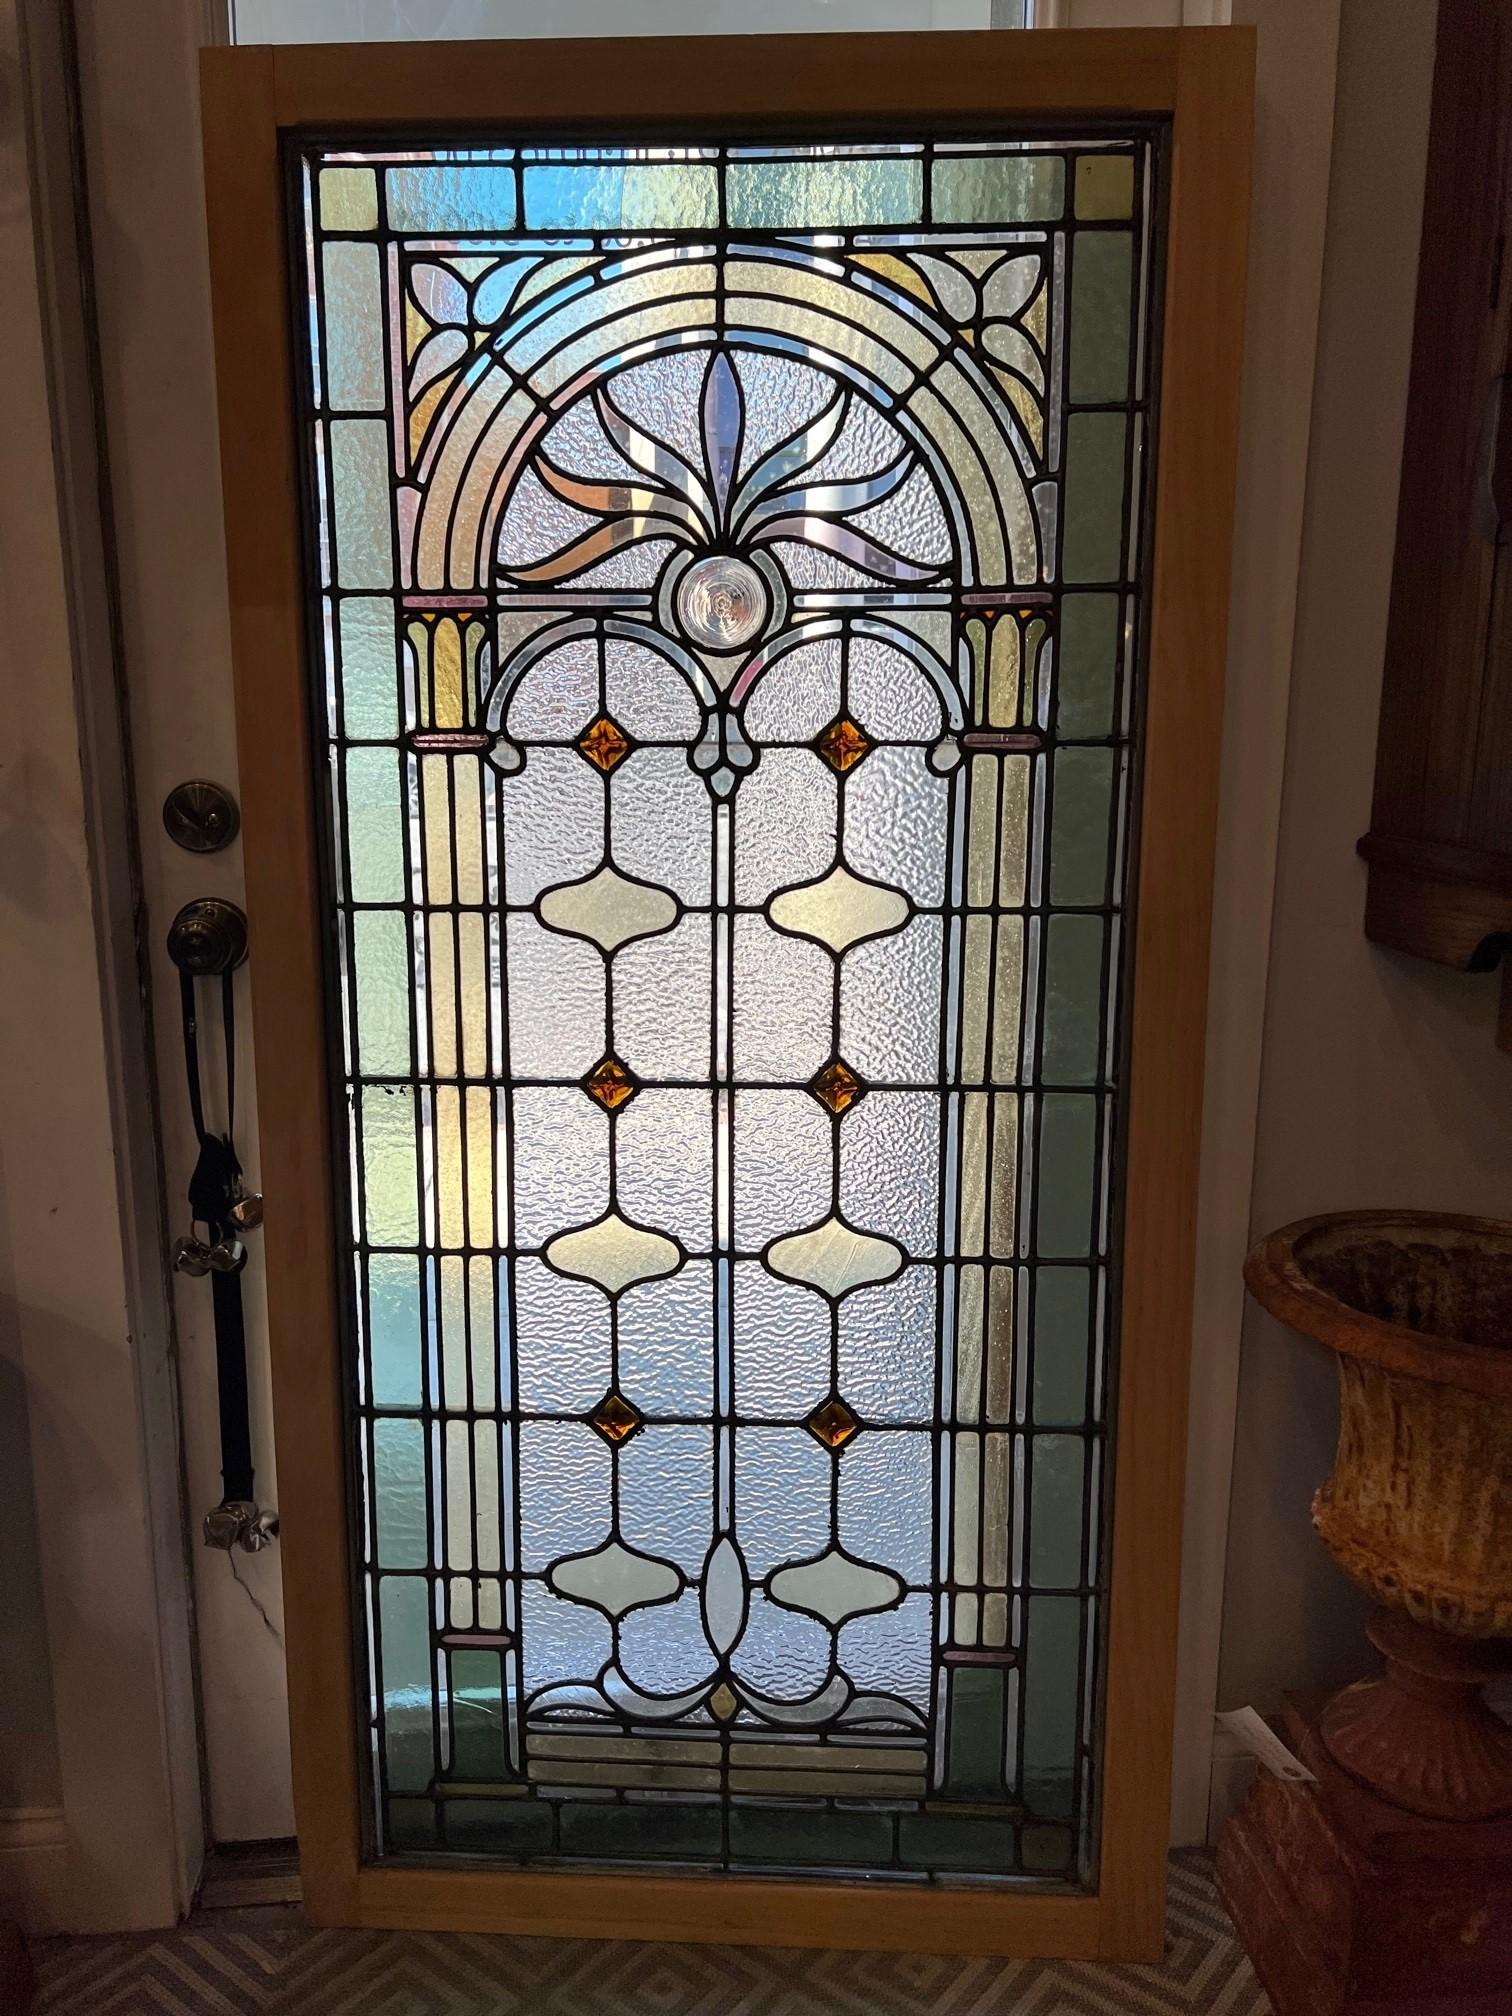 Early 20th century stained glass window in a new frame in great condition. This is a beautiful window with an arch top in the design and a rondel in the center. In the light it is a nice bright window with great colors. This is one of many windows